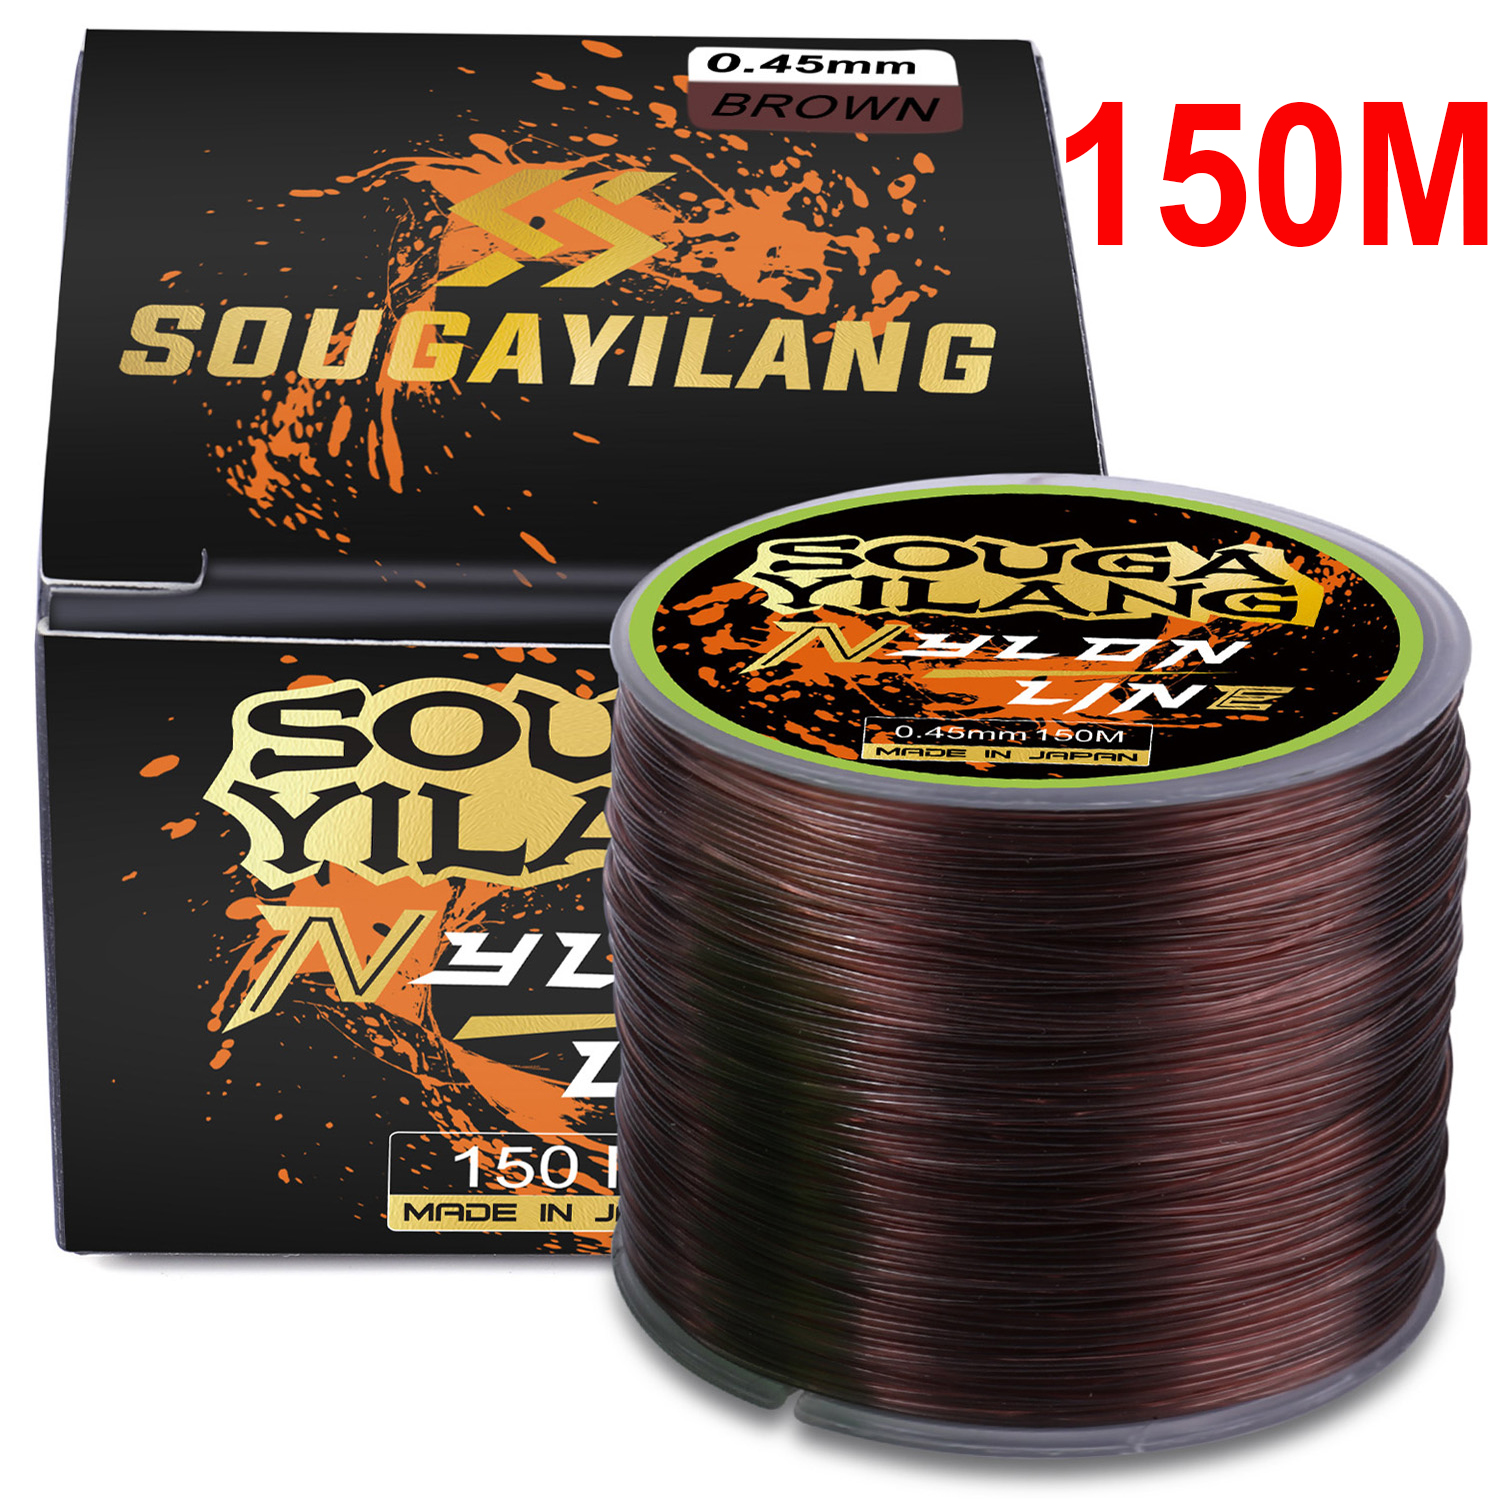 500m Fishing Line Super Strong Monofilament Durable Nylon Line for